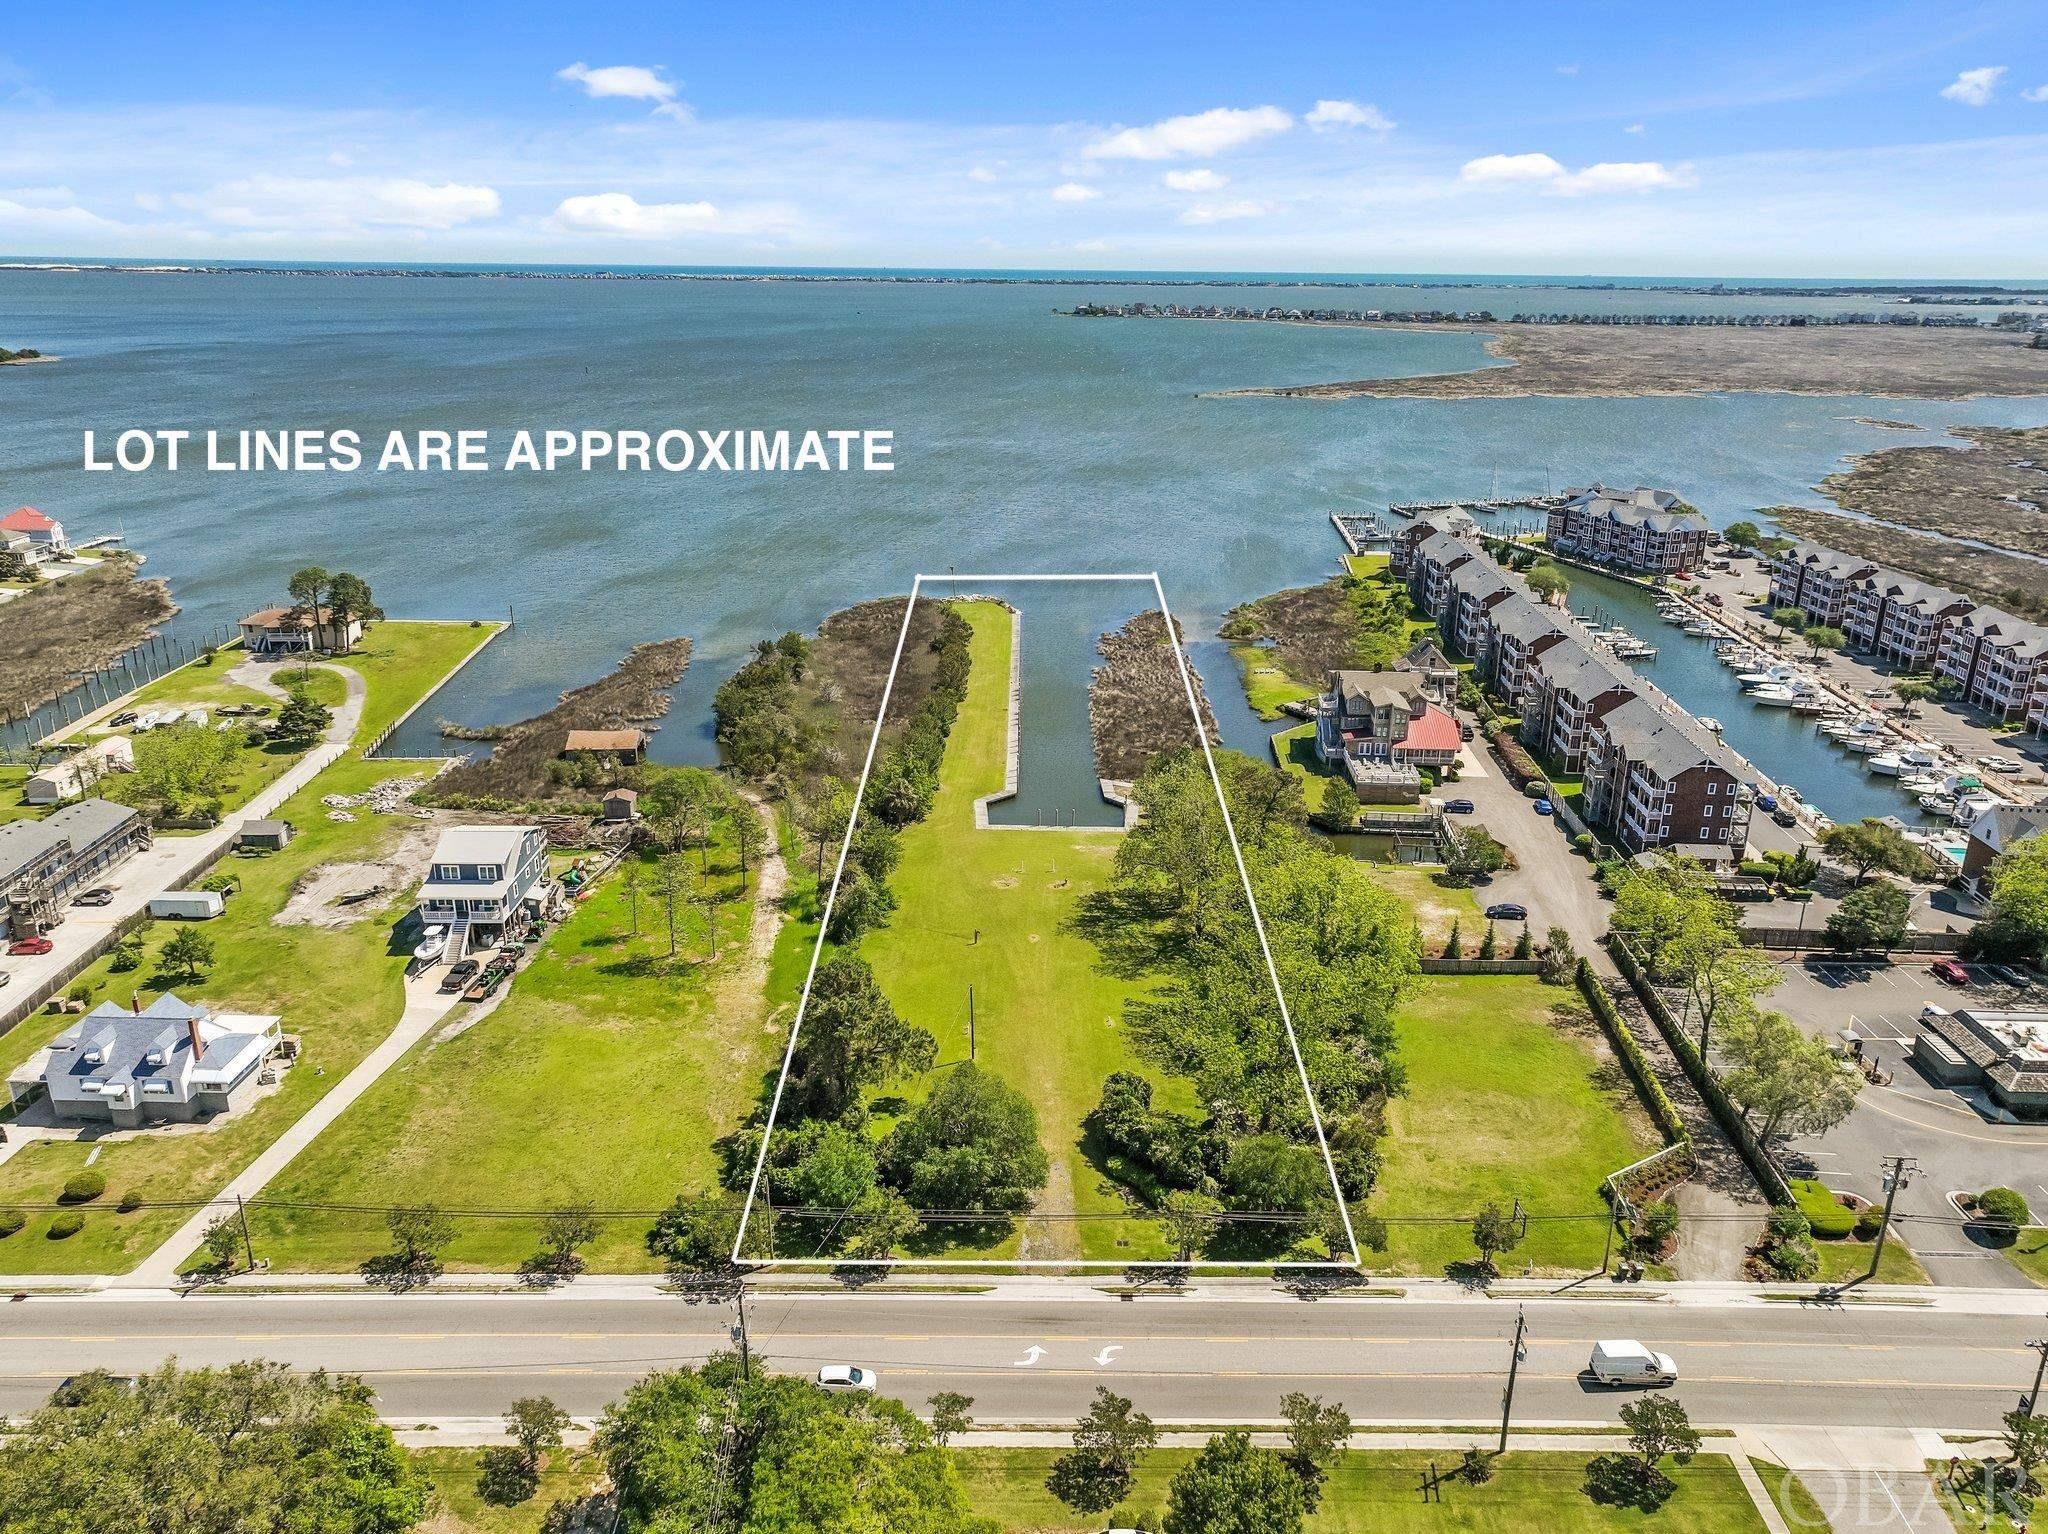 Manteo Waterfront Opportunity!  Development Opportunity!  A Special Property!   3.19 Acres of Prime waterfront near historic downtown Manteo.  Comprised of two parcels totaling 3.19 acres, there is 175 feet of street frontage, a 40 foot wide deep water canal and boat basin, 589 linear feet of bulkheading, dockage, boardwalk and incredible water views!  The parcel is zoned B2, which offers a multitude of potential uses that could be residential, commercial or mixed use.  Considerable expense has already been invested in the land including clearing, dredging of the canal, bulkheading and the addition of infrastructure including water, sewer and power.  This one is ready for development!  Several concepts have been created by engineers and surveyors to show the possibiity of single family development or mulit-family development.  Call agent for more details.  Amazing location near Historic downtown Manteo, Shallowbag Bay Marina, Pirates Cove Marina and all the Outer Banks has to offer.  Nothing compares to this waterfront opportunity!  It's rare combination of water frontage, deep water access, boat basin and development opportunity makes this a one of a kind property!